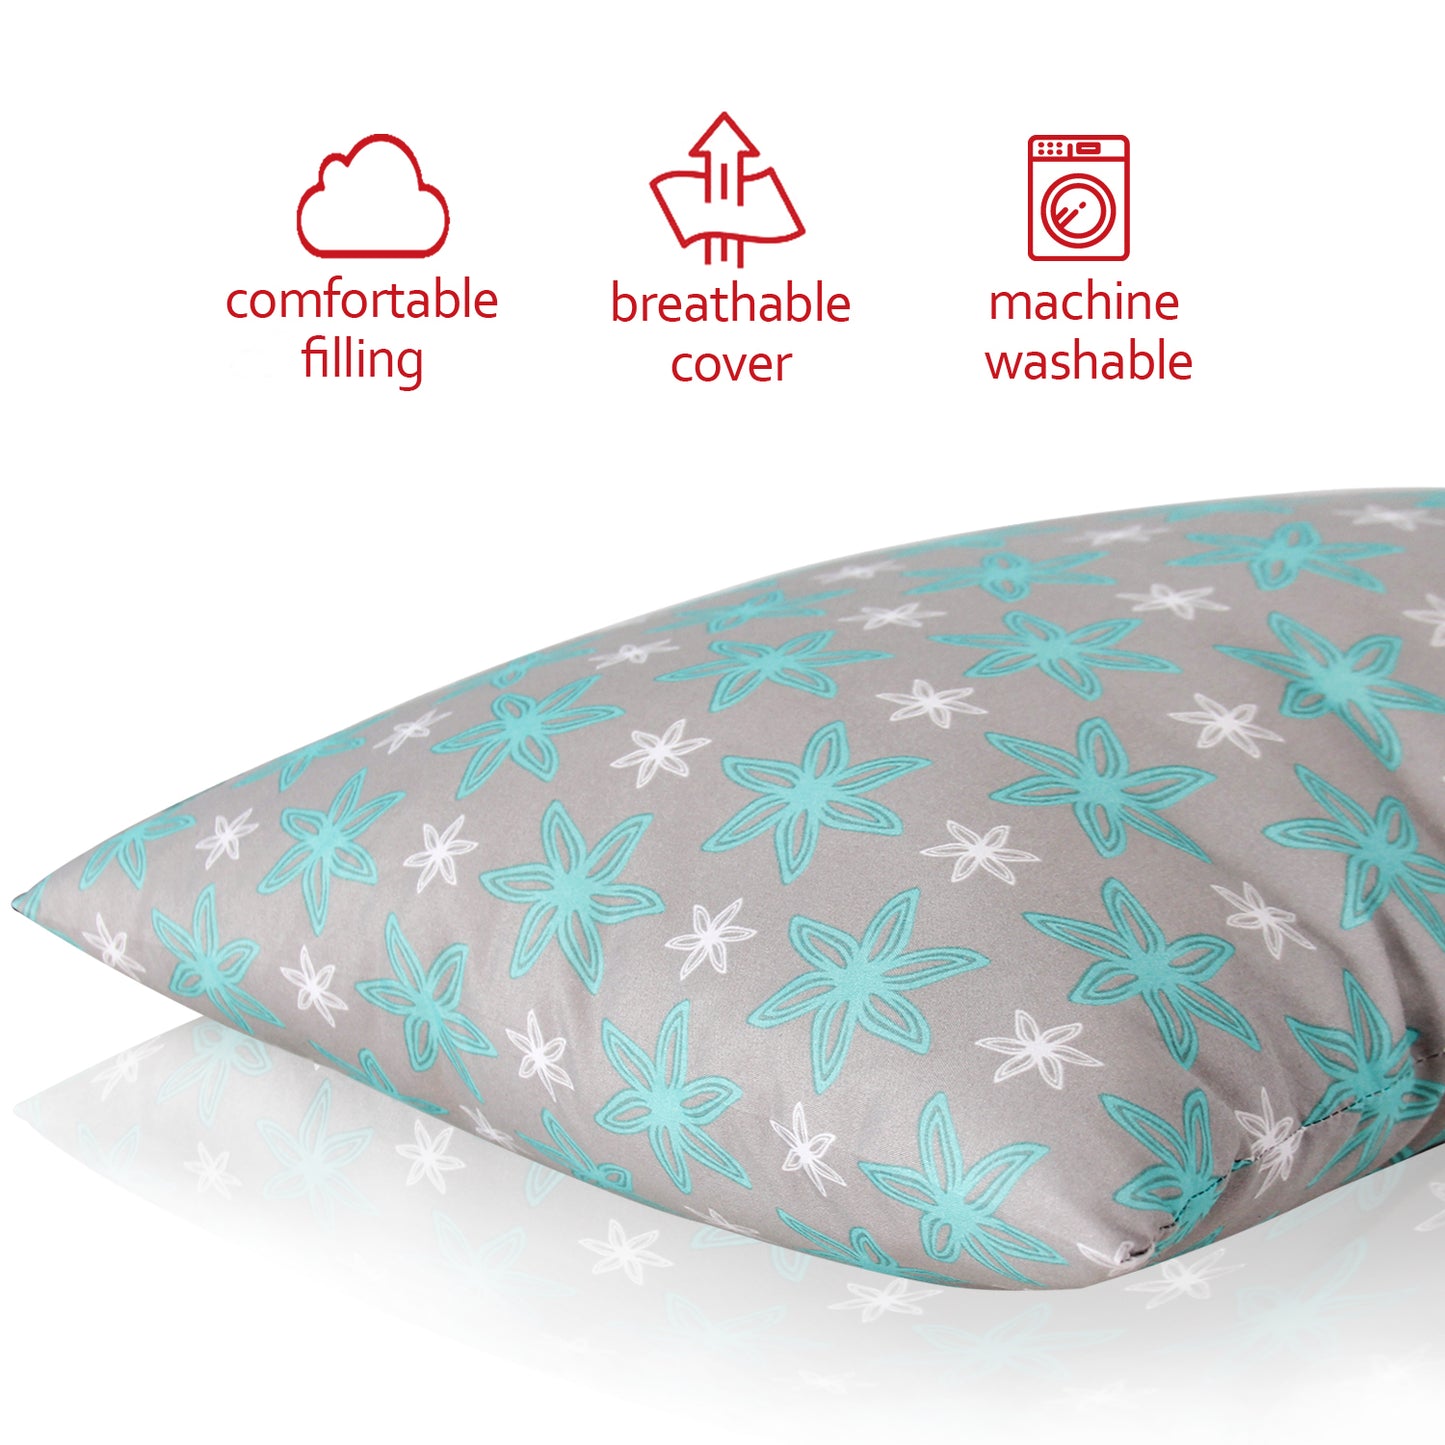 Toddler Pillow- Flowers Print, Hypoallergenic, Soft